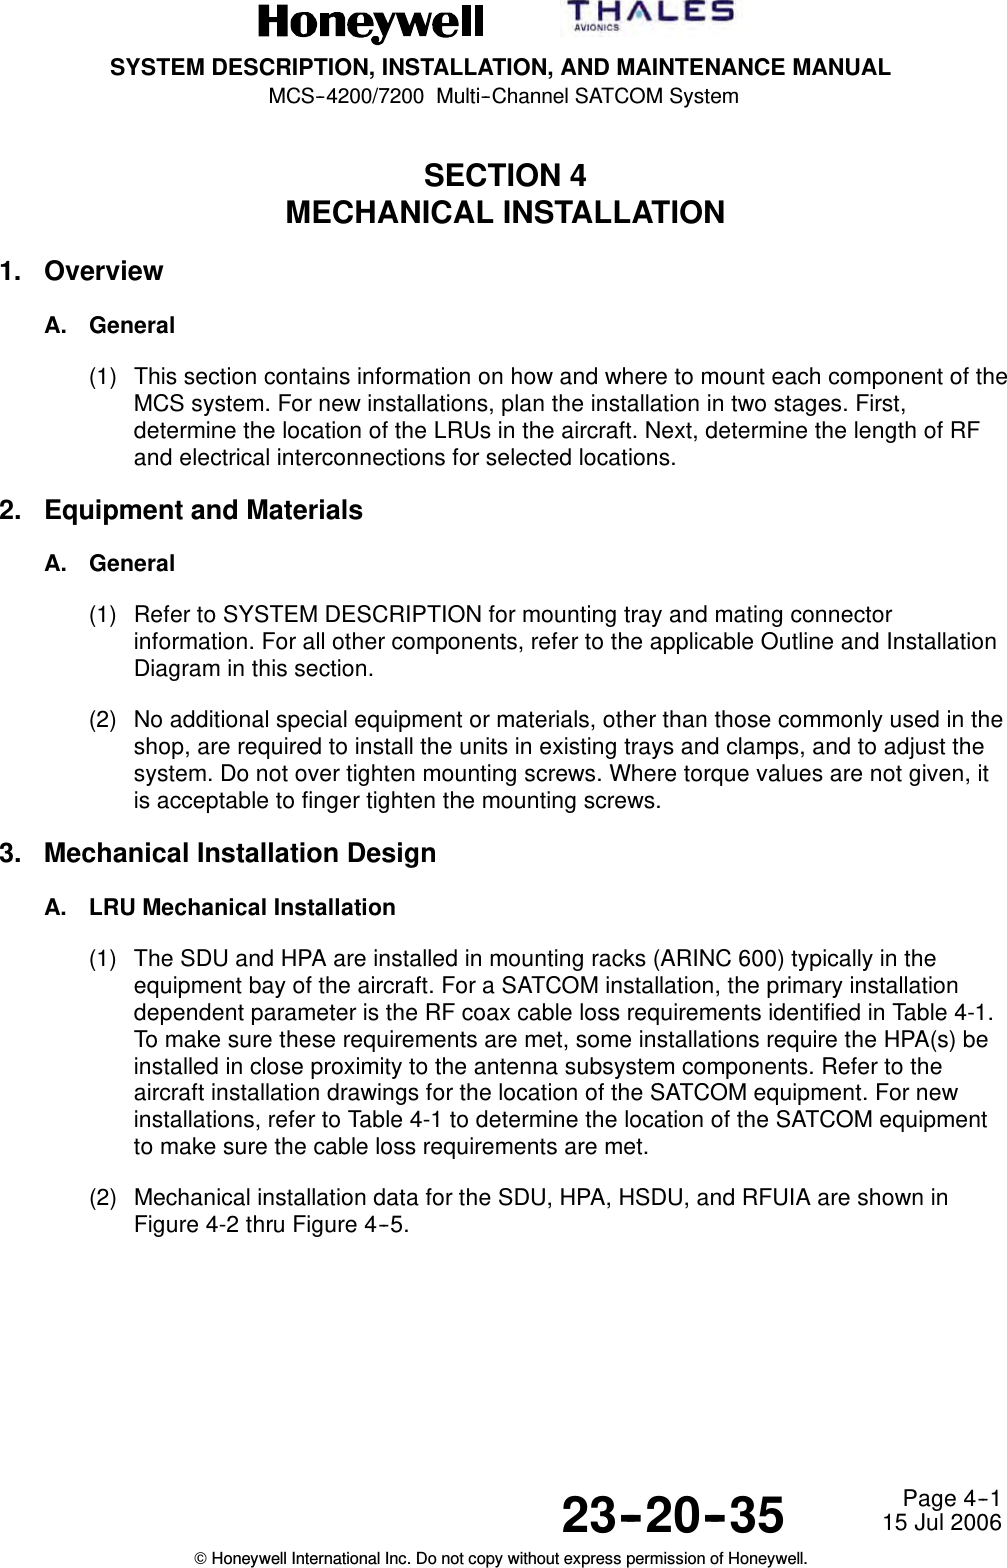 SYSTEM DESCRIPTION, INSTALLATION, AND MAINTENANCE MANUALMCS--4200/7200 Multi--Channel SATCOM System23--20--35 15 Jul 2006Honeywell International Inc. Do not copy without express permission of Honeywell.Page 4--1SECTION 4MECHANICAL INSTALLATION1. OverviewA. General(1) This section contains information on how and where to mount each component of theMCS system. For new installations, plan the installation in two stages. First,determine the location of the LRUs in the aircraft. Next, determine the length of RFand electrical interconnections for selected locations.2. Equipment and MaterialsA. General(1) Refer to SYSTEM DESCRIPTION for mounting tray and mating connectorinformation. For all other components, refer to the applicable Outline and InstallationDiagram in this section.(2) No additional special equipment or materials, other than those commonly used in theshop, are required to install the units in existing trays and clamps, and to adjust thesystem. Do not over tighten mounting screws. Where torque values are not given, itis acceptable to finger tighten the mounting screws.3. Mechanical Installation DesignA. LRU Mechanical Installation(1) The SDU and HPA are installed in mounting racks (ARINC 600) typically in theequipment bay of the aircraft. For a SATCOM installation, the primary installationdependent parameter is the RF coax cable loss requirements identified in Table 4-1.To make sure these requirements are met, some installations require the HPA(s) beinstalled in close proximity to the antenna subsystem components. Refer to theaircraft installation drawings for the location of the SATCOM equipment. For newinstallations, refer to Table 4-1 to determine the location of the SATCOM equipmentto make sure the cable loss requirements are met.(2) Mechanical installation data for the SDU, HPA, HSDU, and RFUIA are shown inFigure 4-2 thru Figure 4--5.